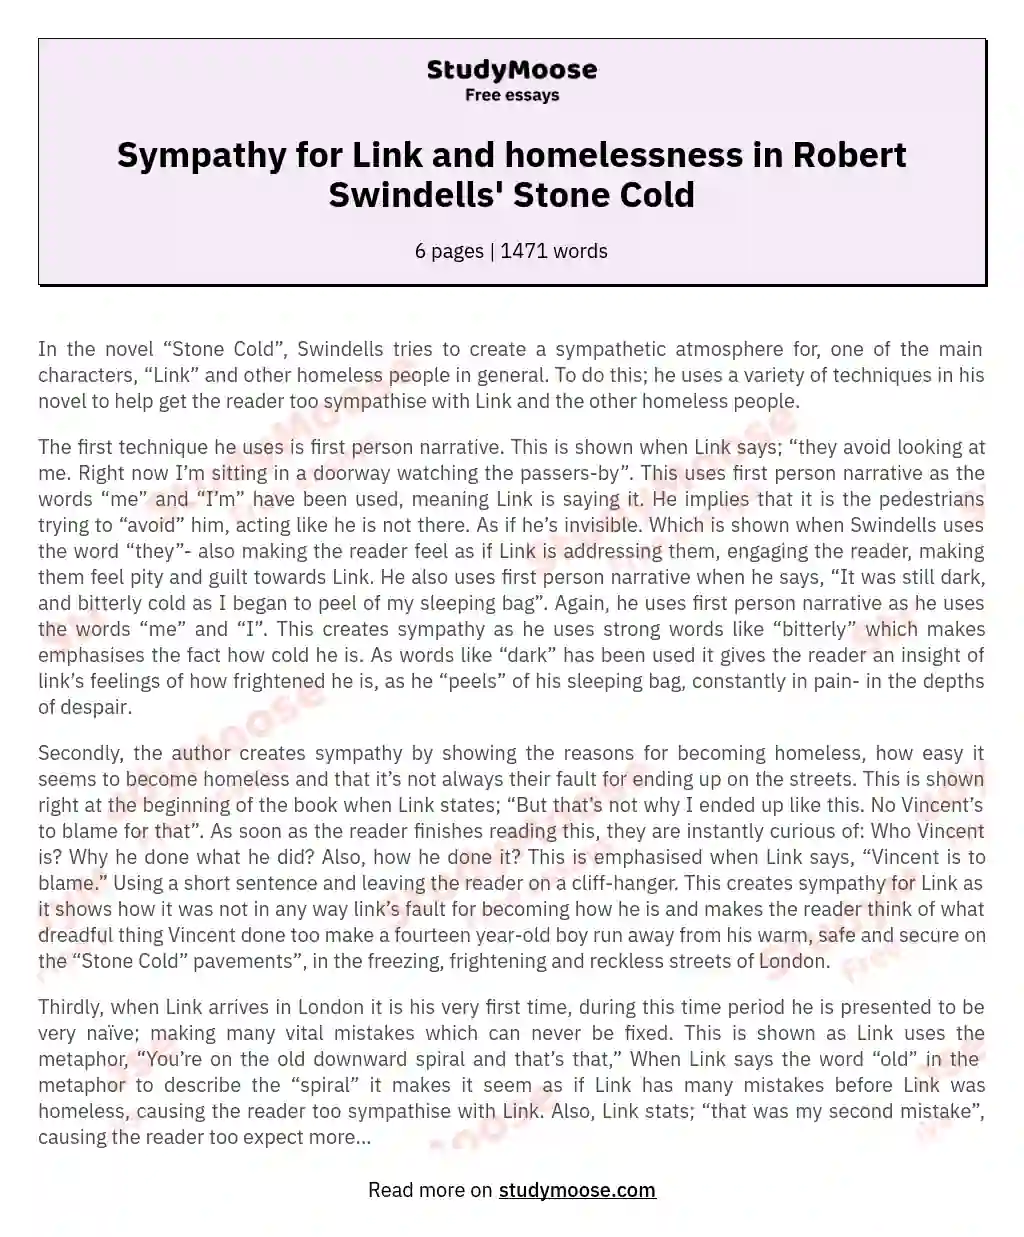 Sympathy for Link and homelessness in Robert Swindells' Stone Cold essay